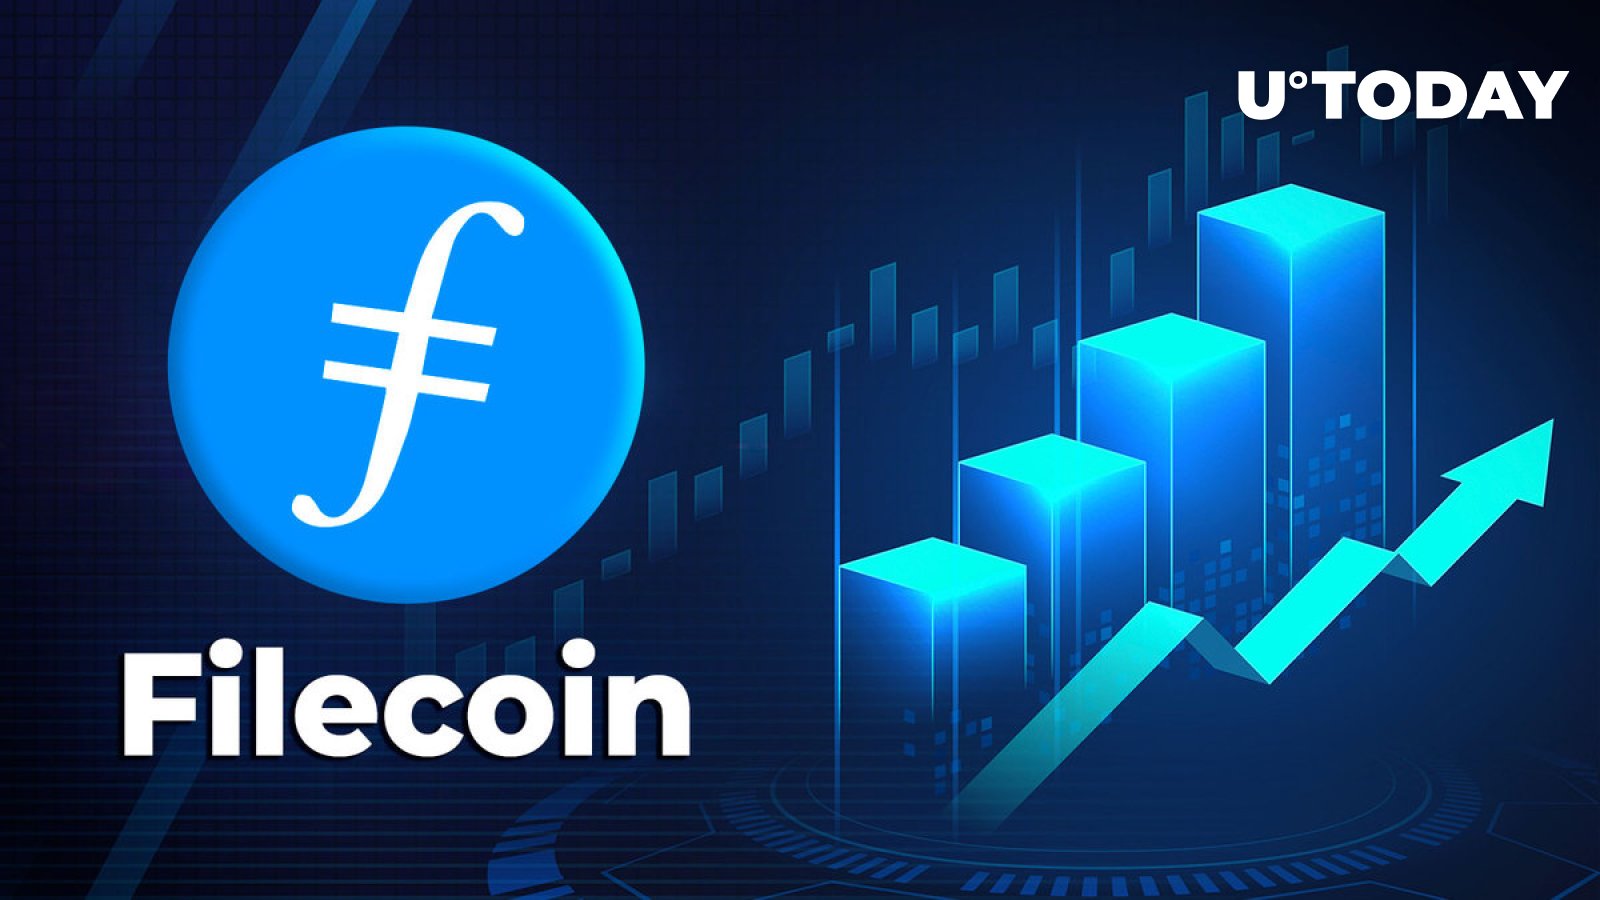 Filecoin is riding the boom in liquid staking – DL News